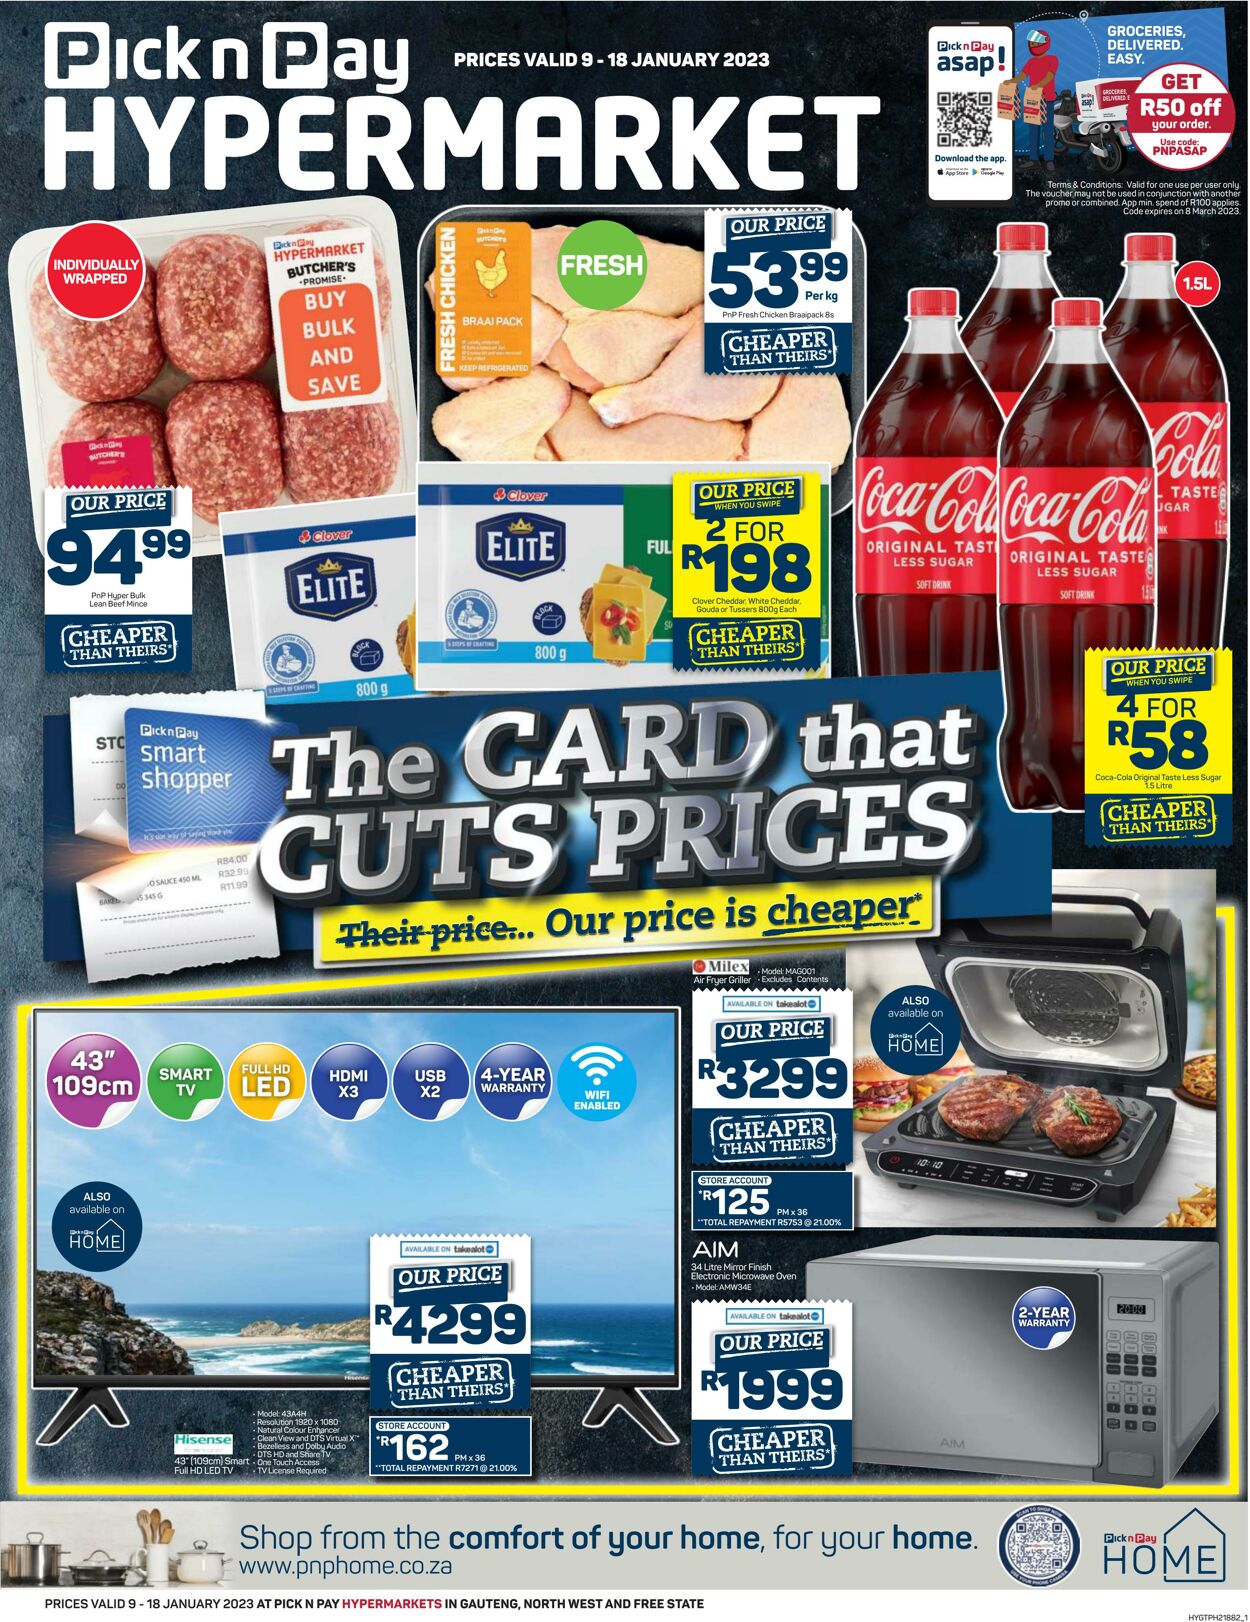 Special Pick n Pay 09.01.2023-18.01.2023